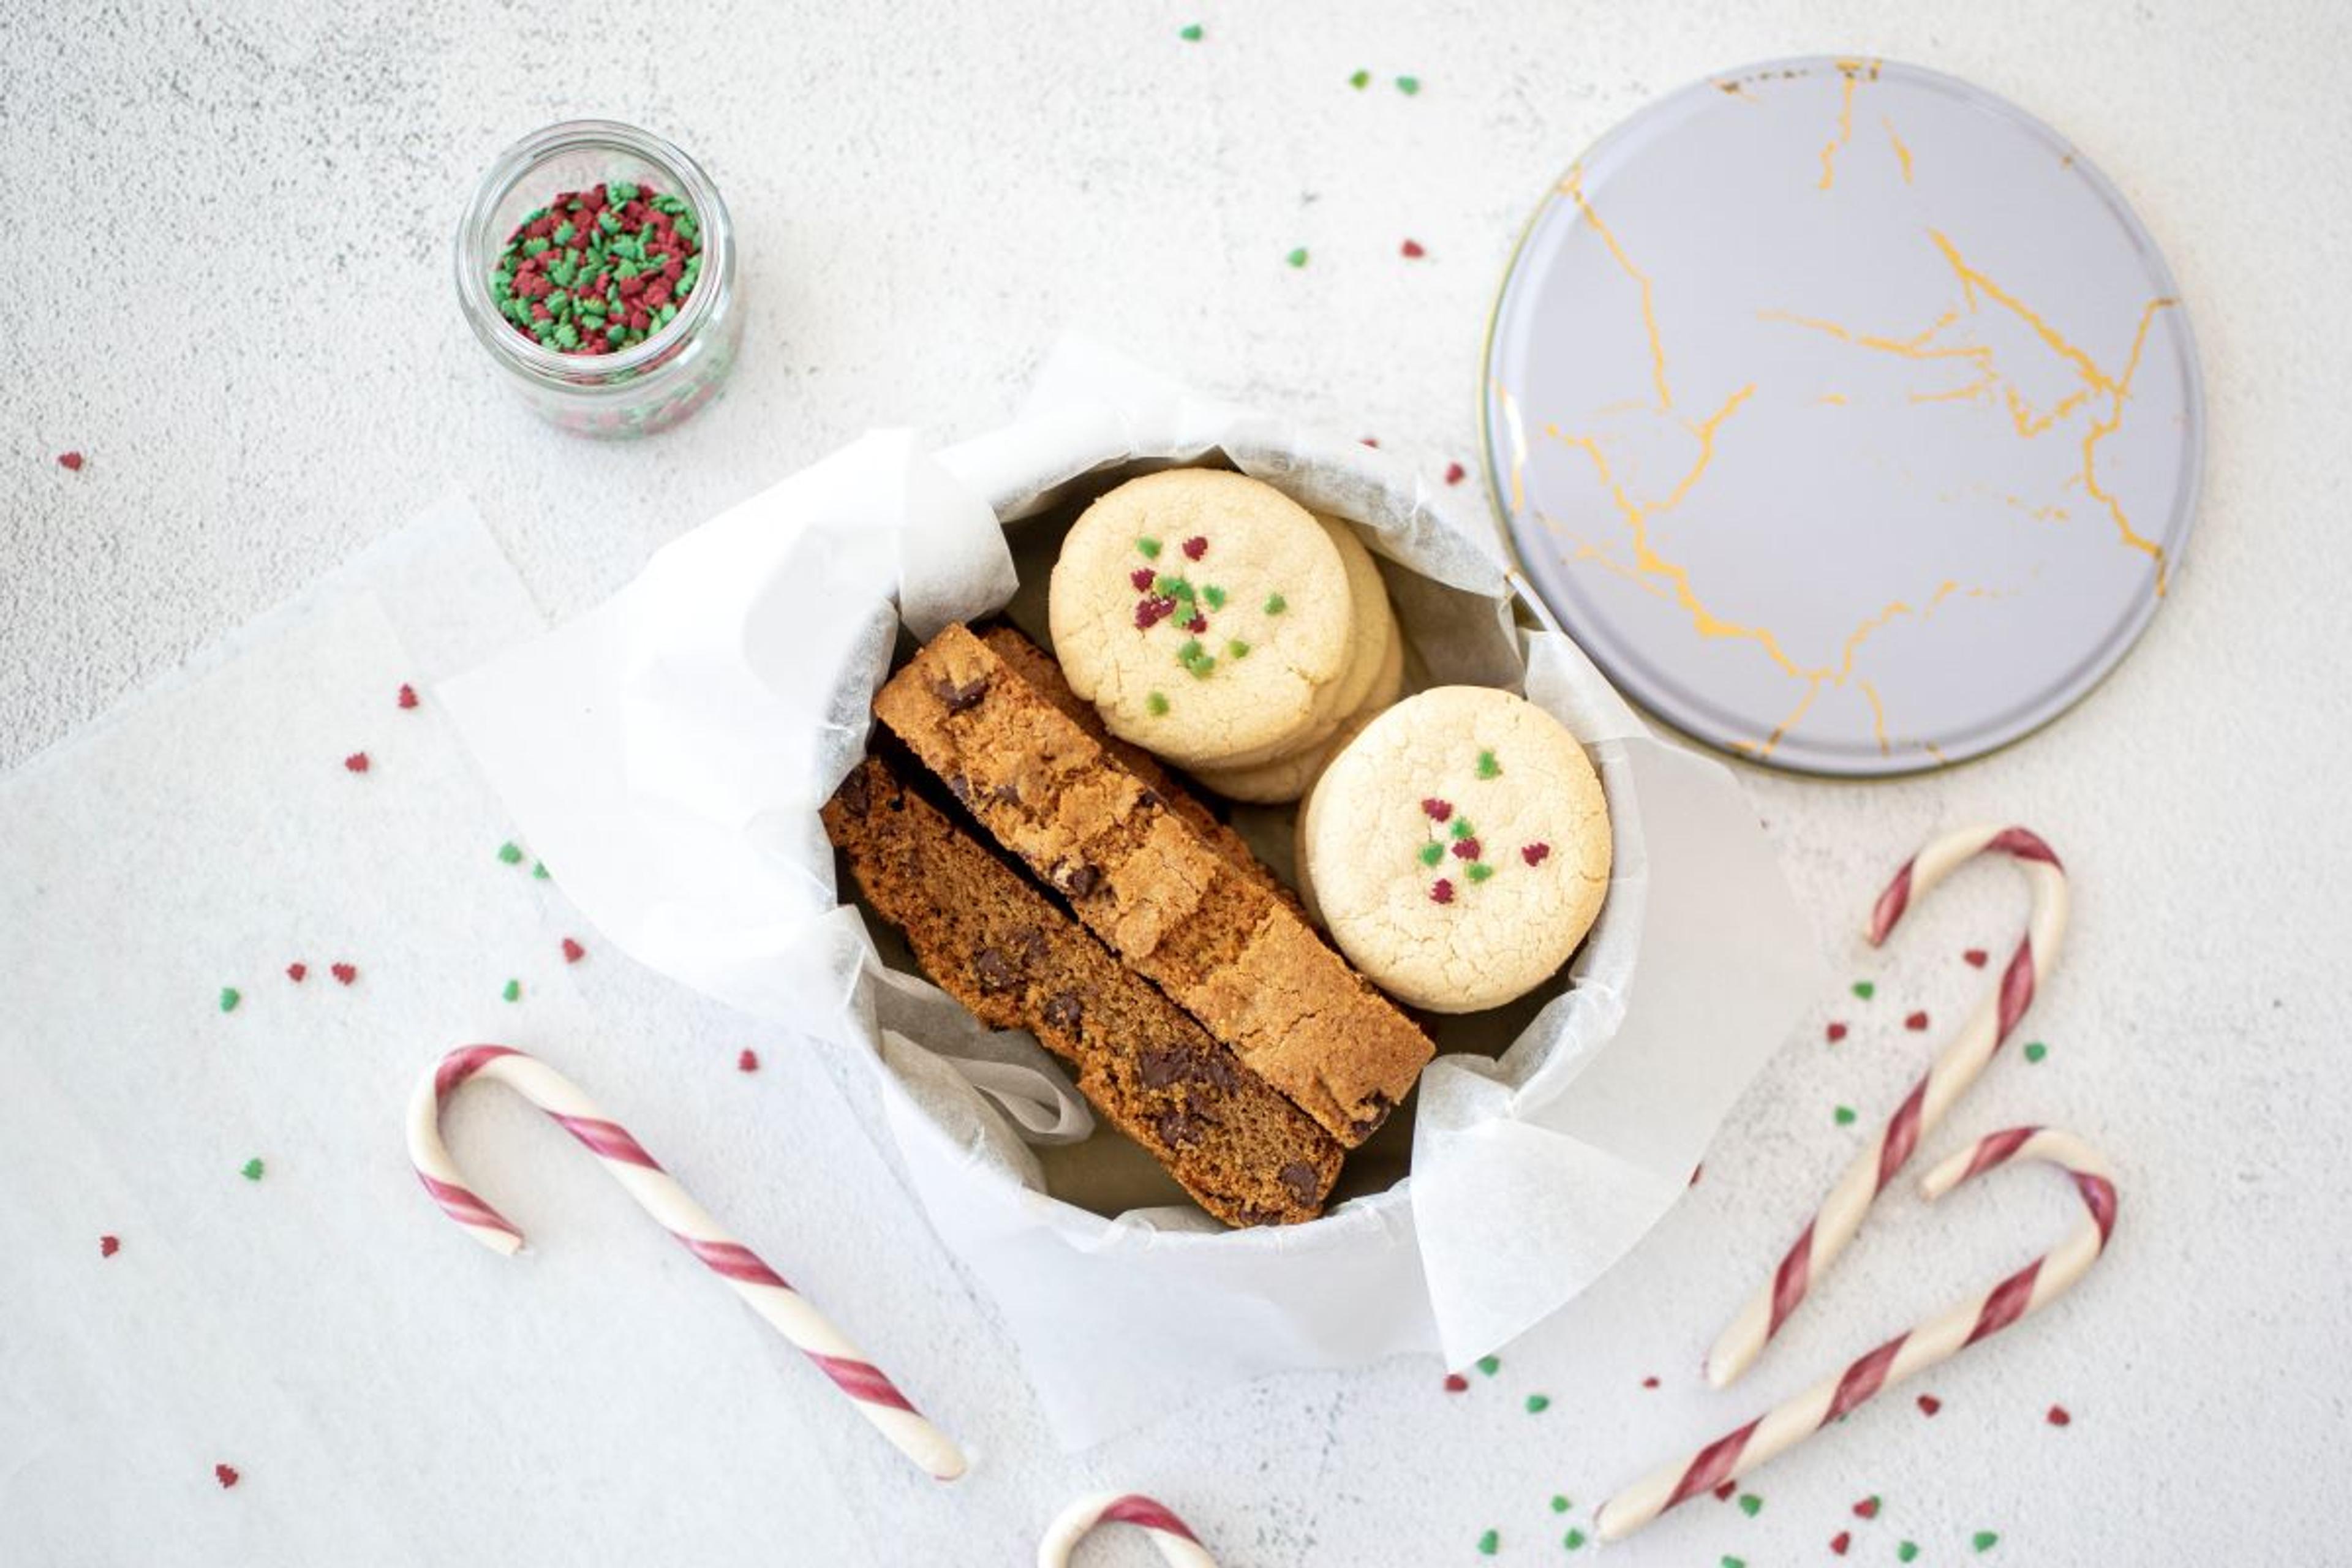 There are a number of holiday tins available to ship cookies in.